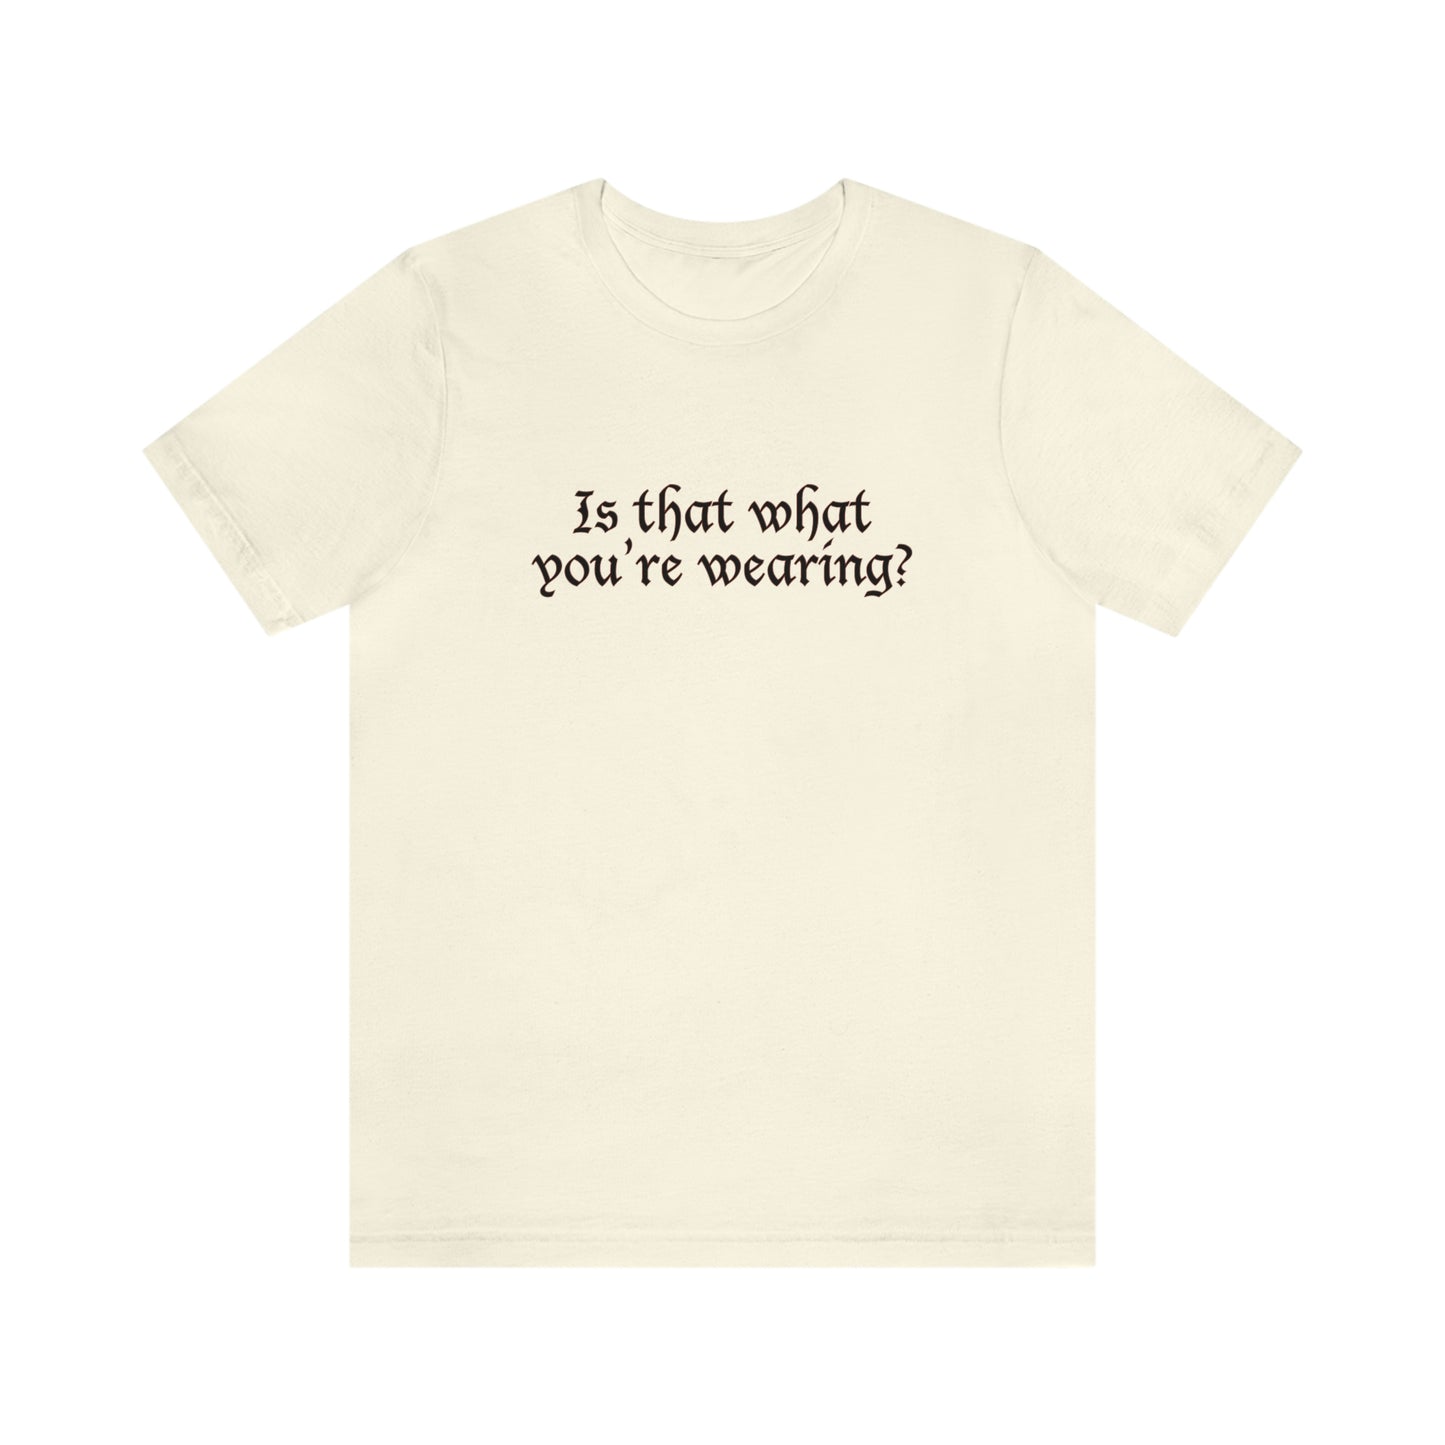 Is That What You're Wearing? - Unisex T-Shirt